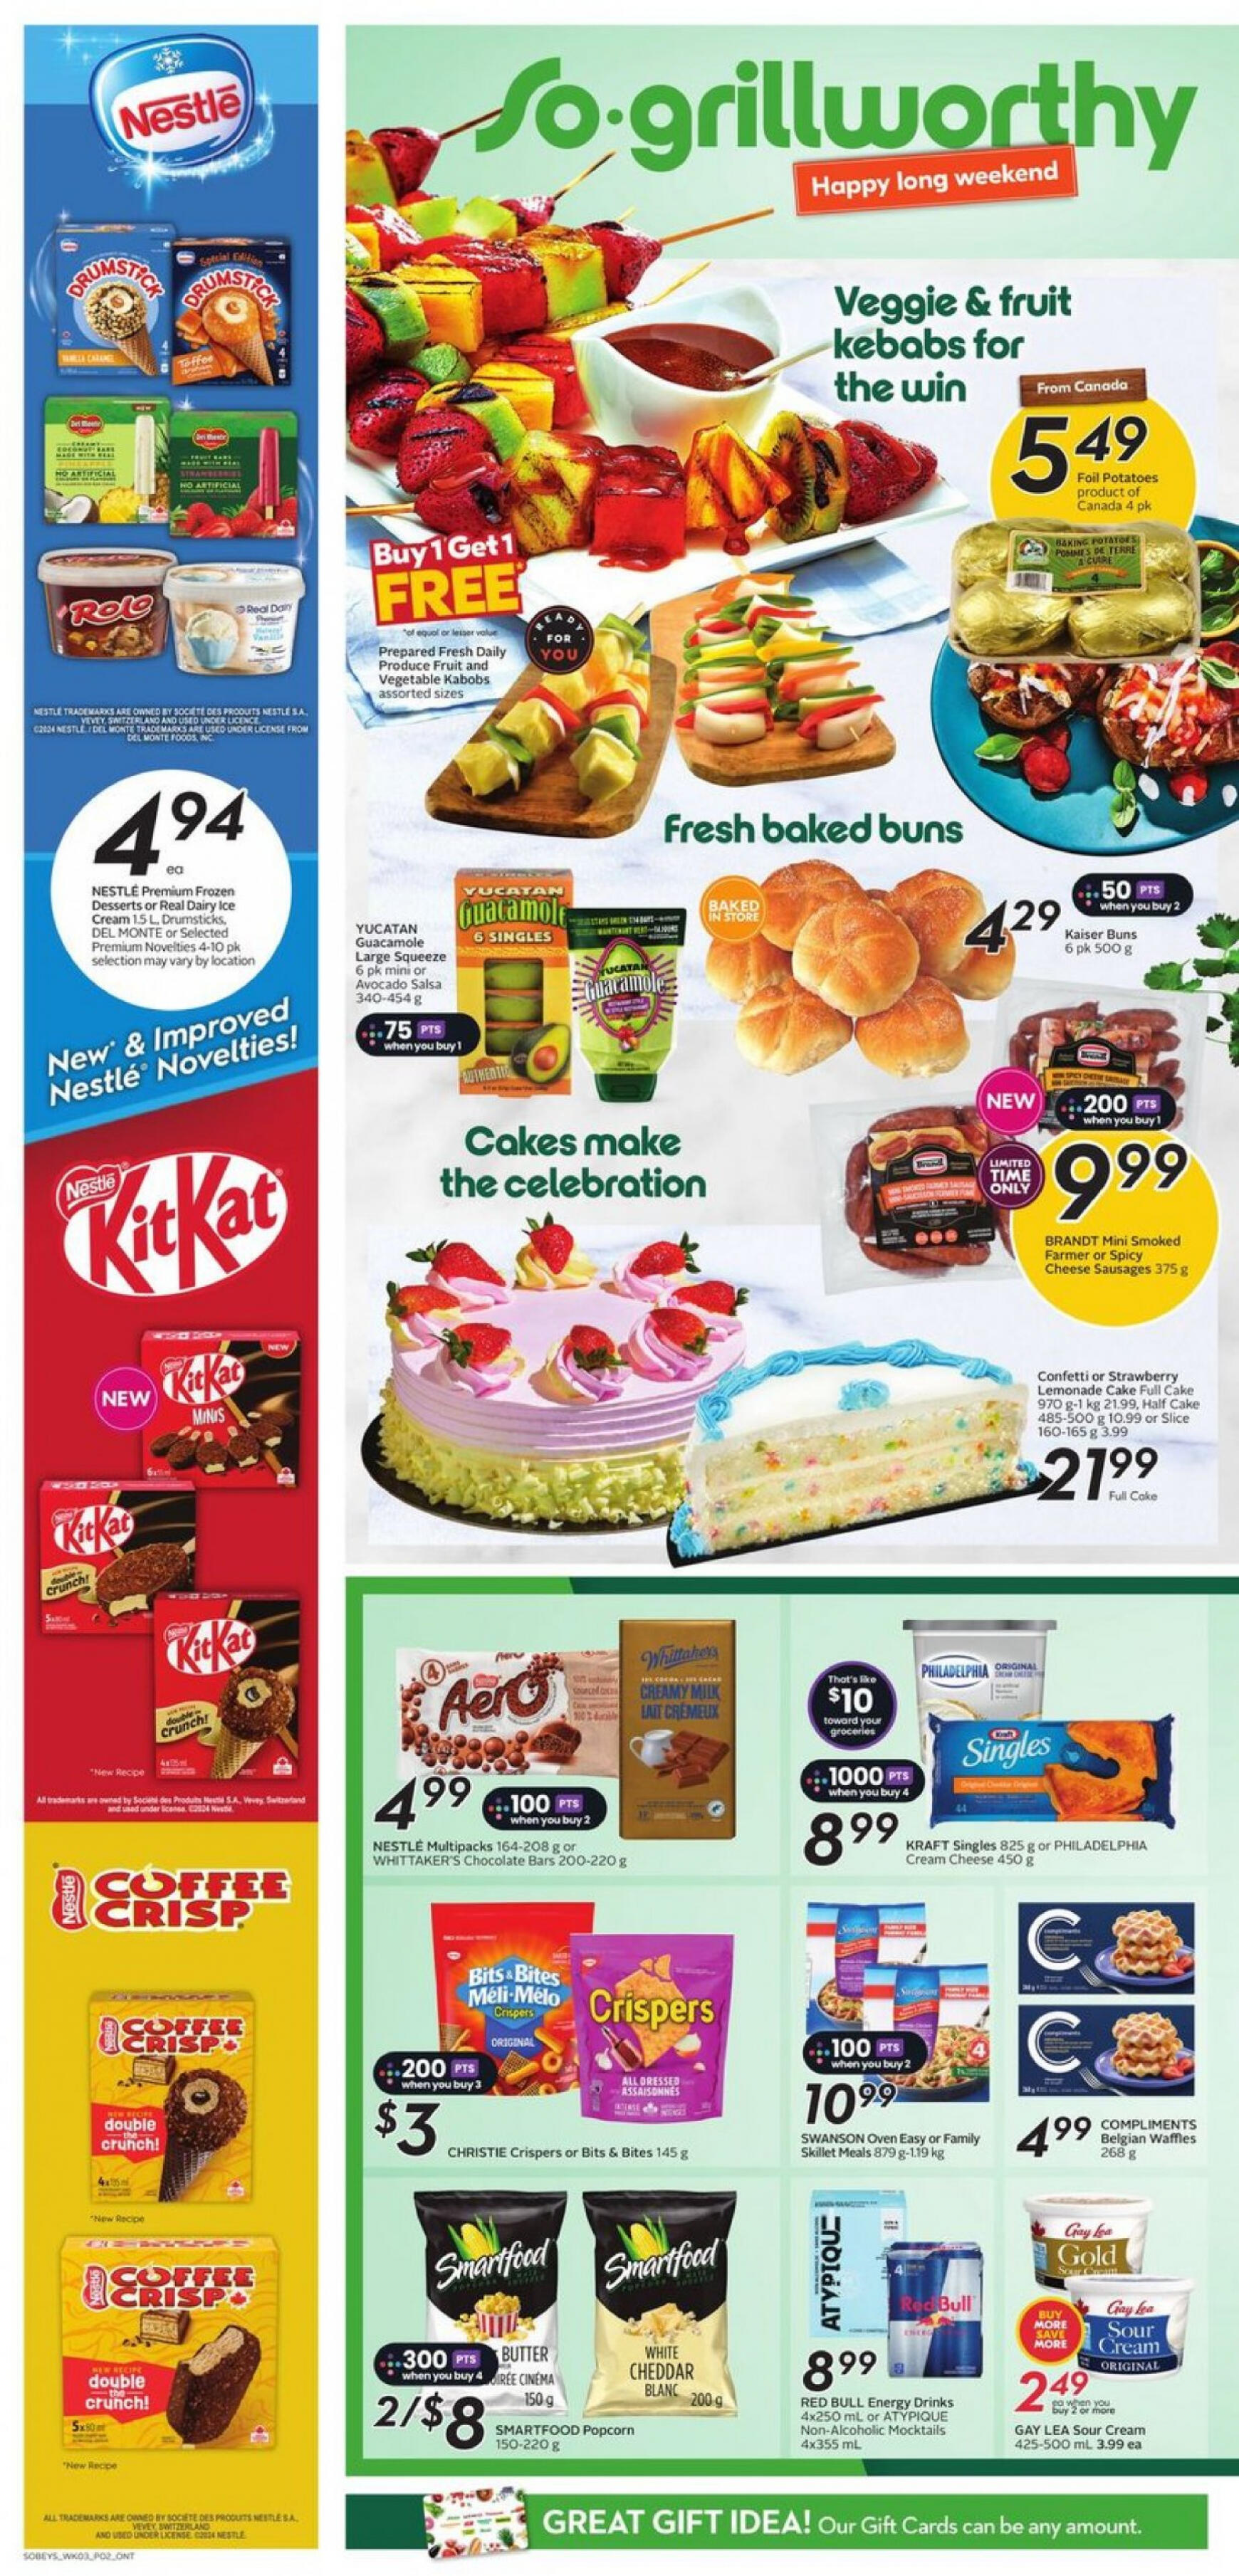 sobeys - Sobeys - Weekly Flyer - Ontario flyer current 16.05. - 22.05. - page: 6